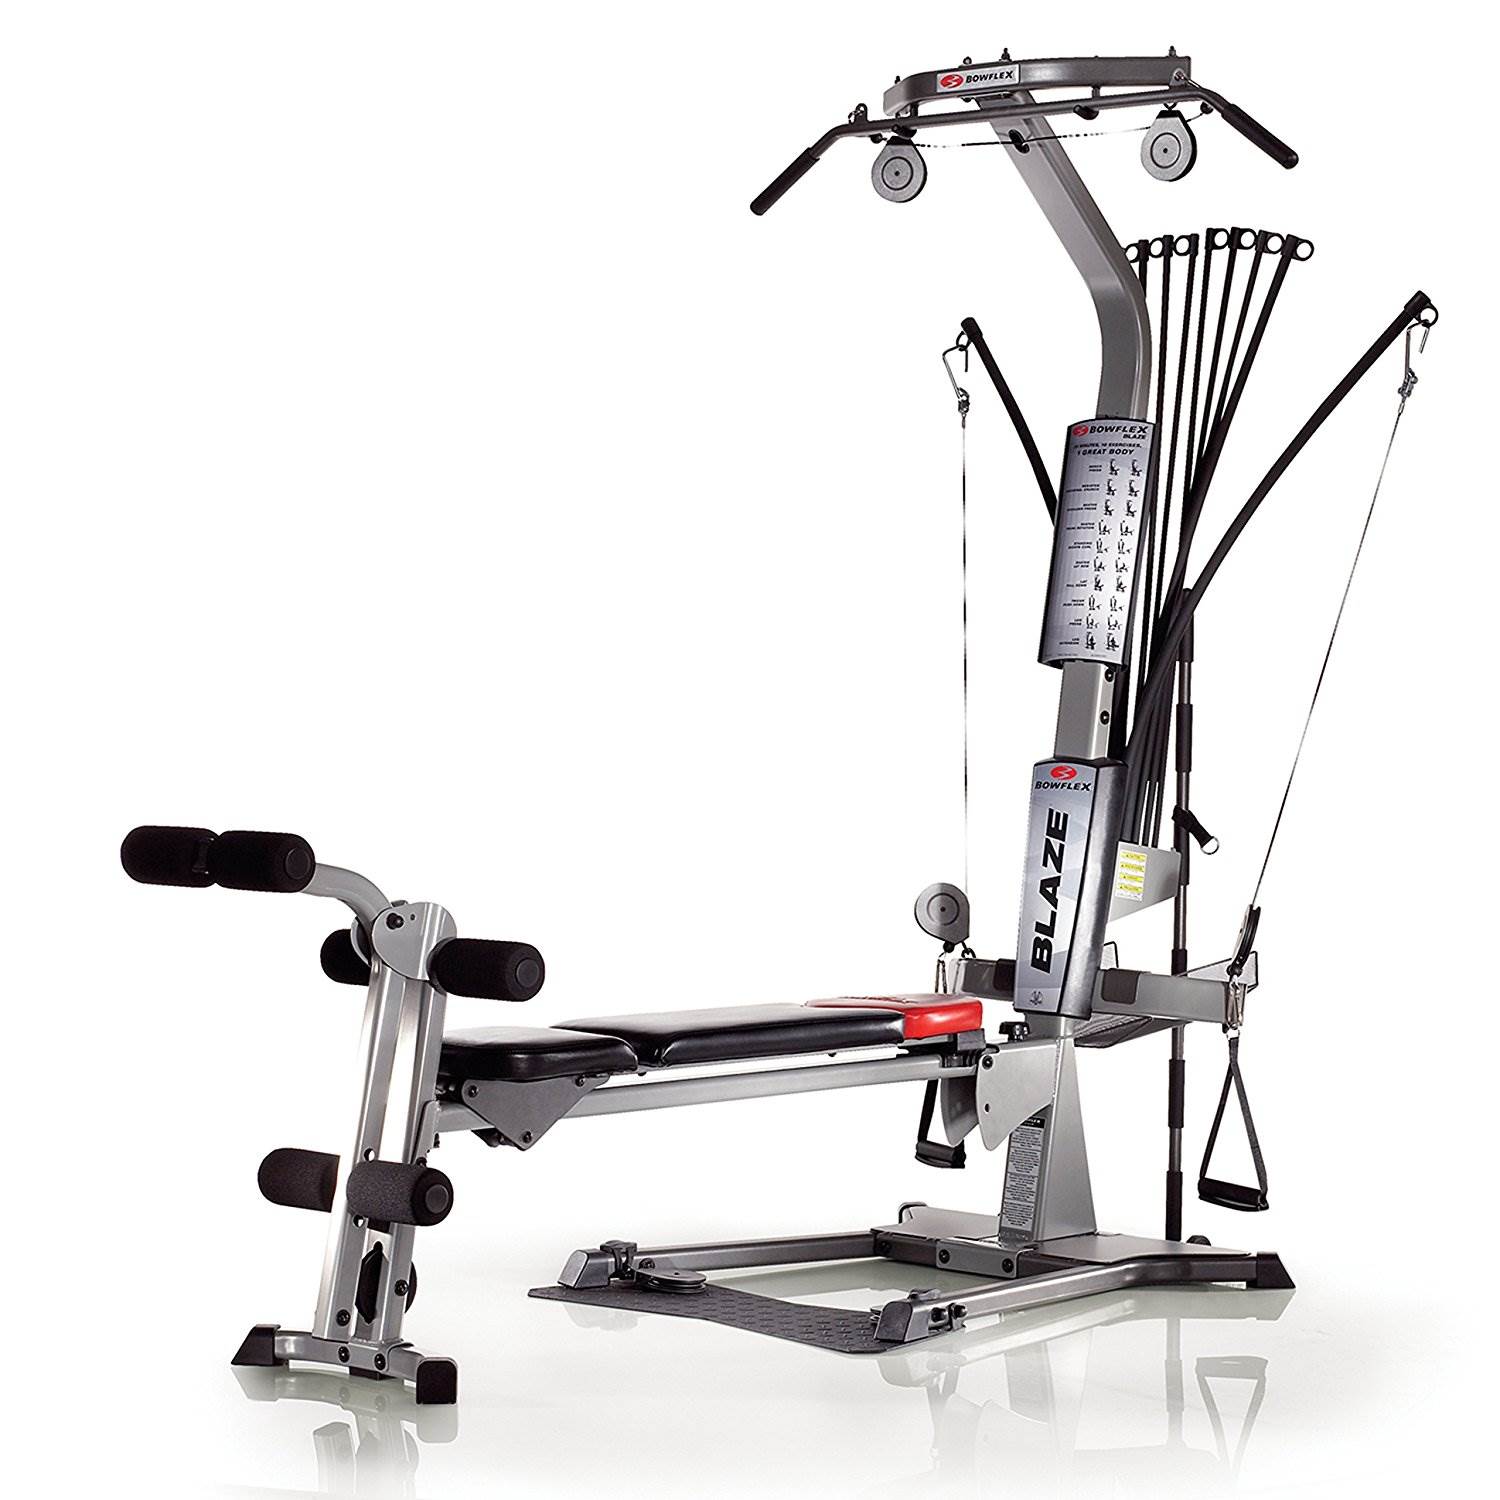 Bowflex Blaze Full Body Workout Machine for Home Gym with 210 Pound Resistance - image 1 of 11